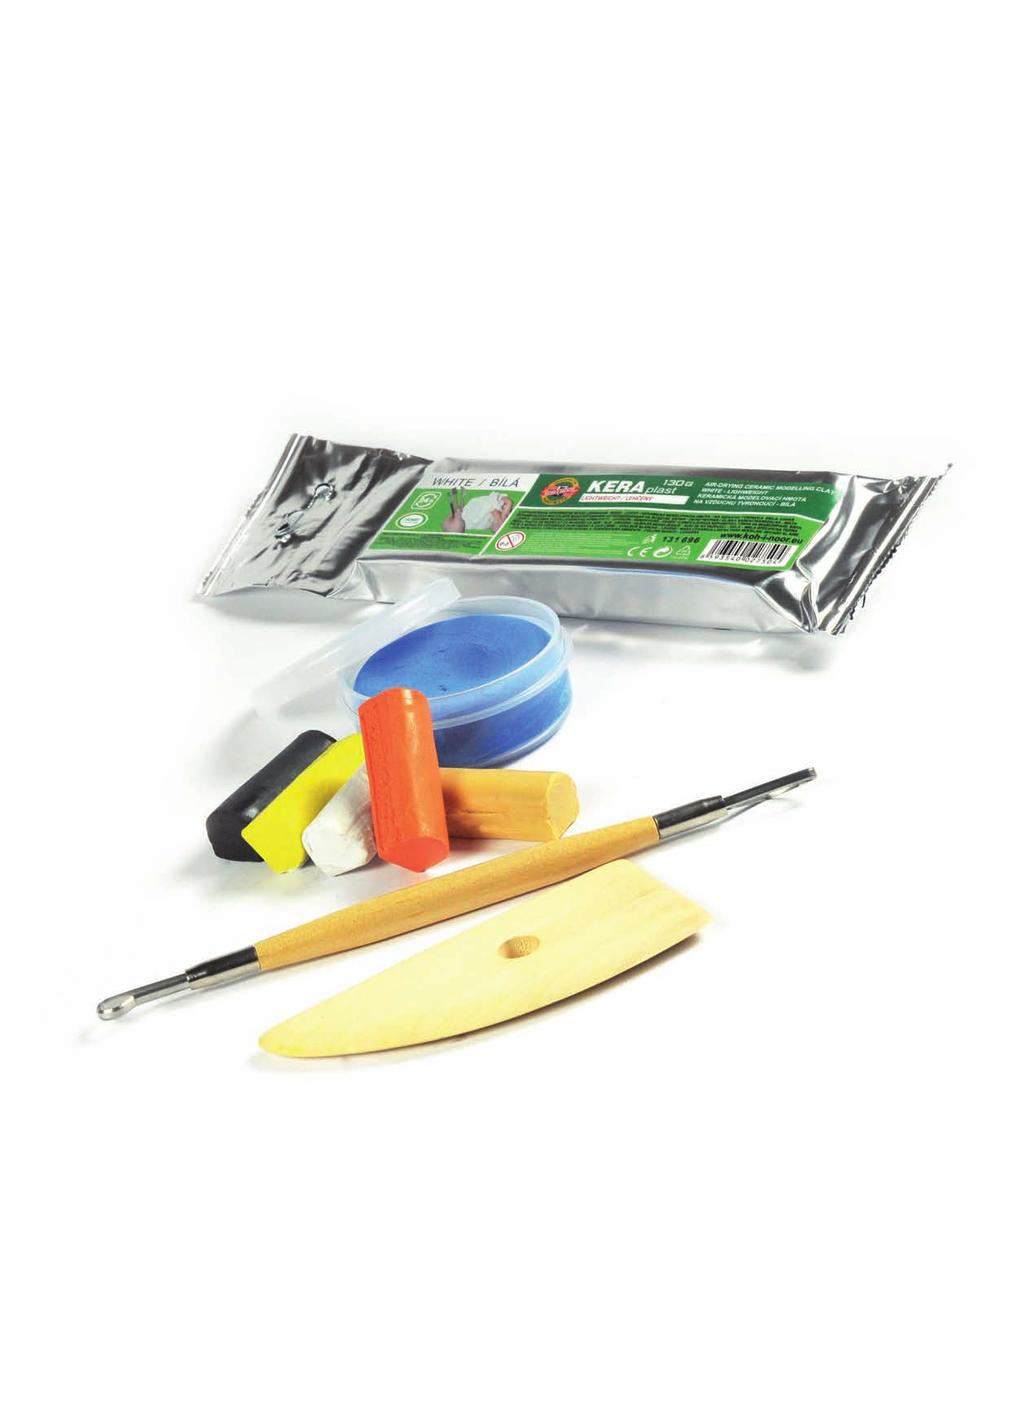 Modelling clays, modelling tools and decorative lacquers Modelliermassen, Spachteln und